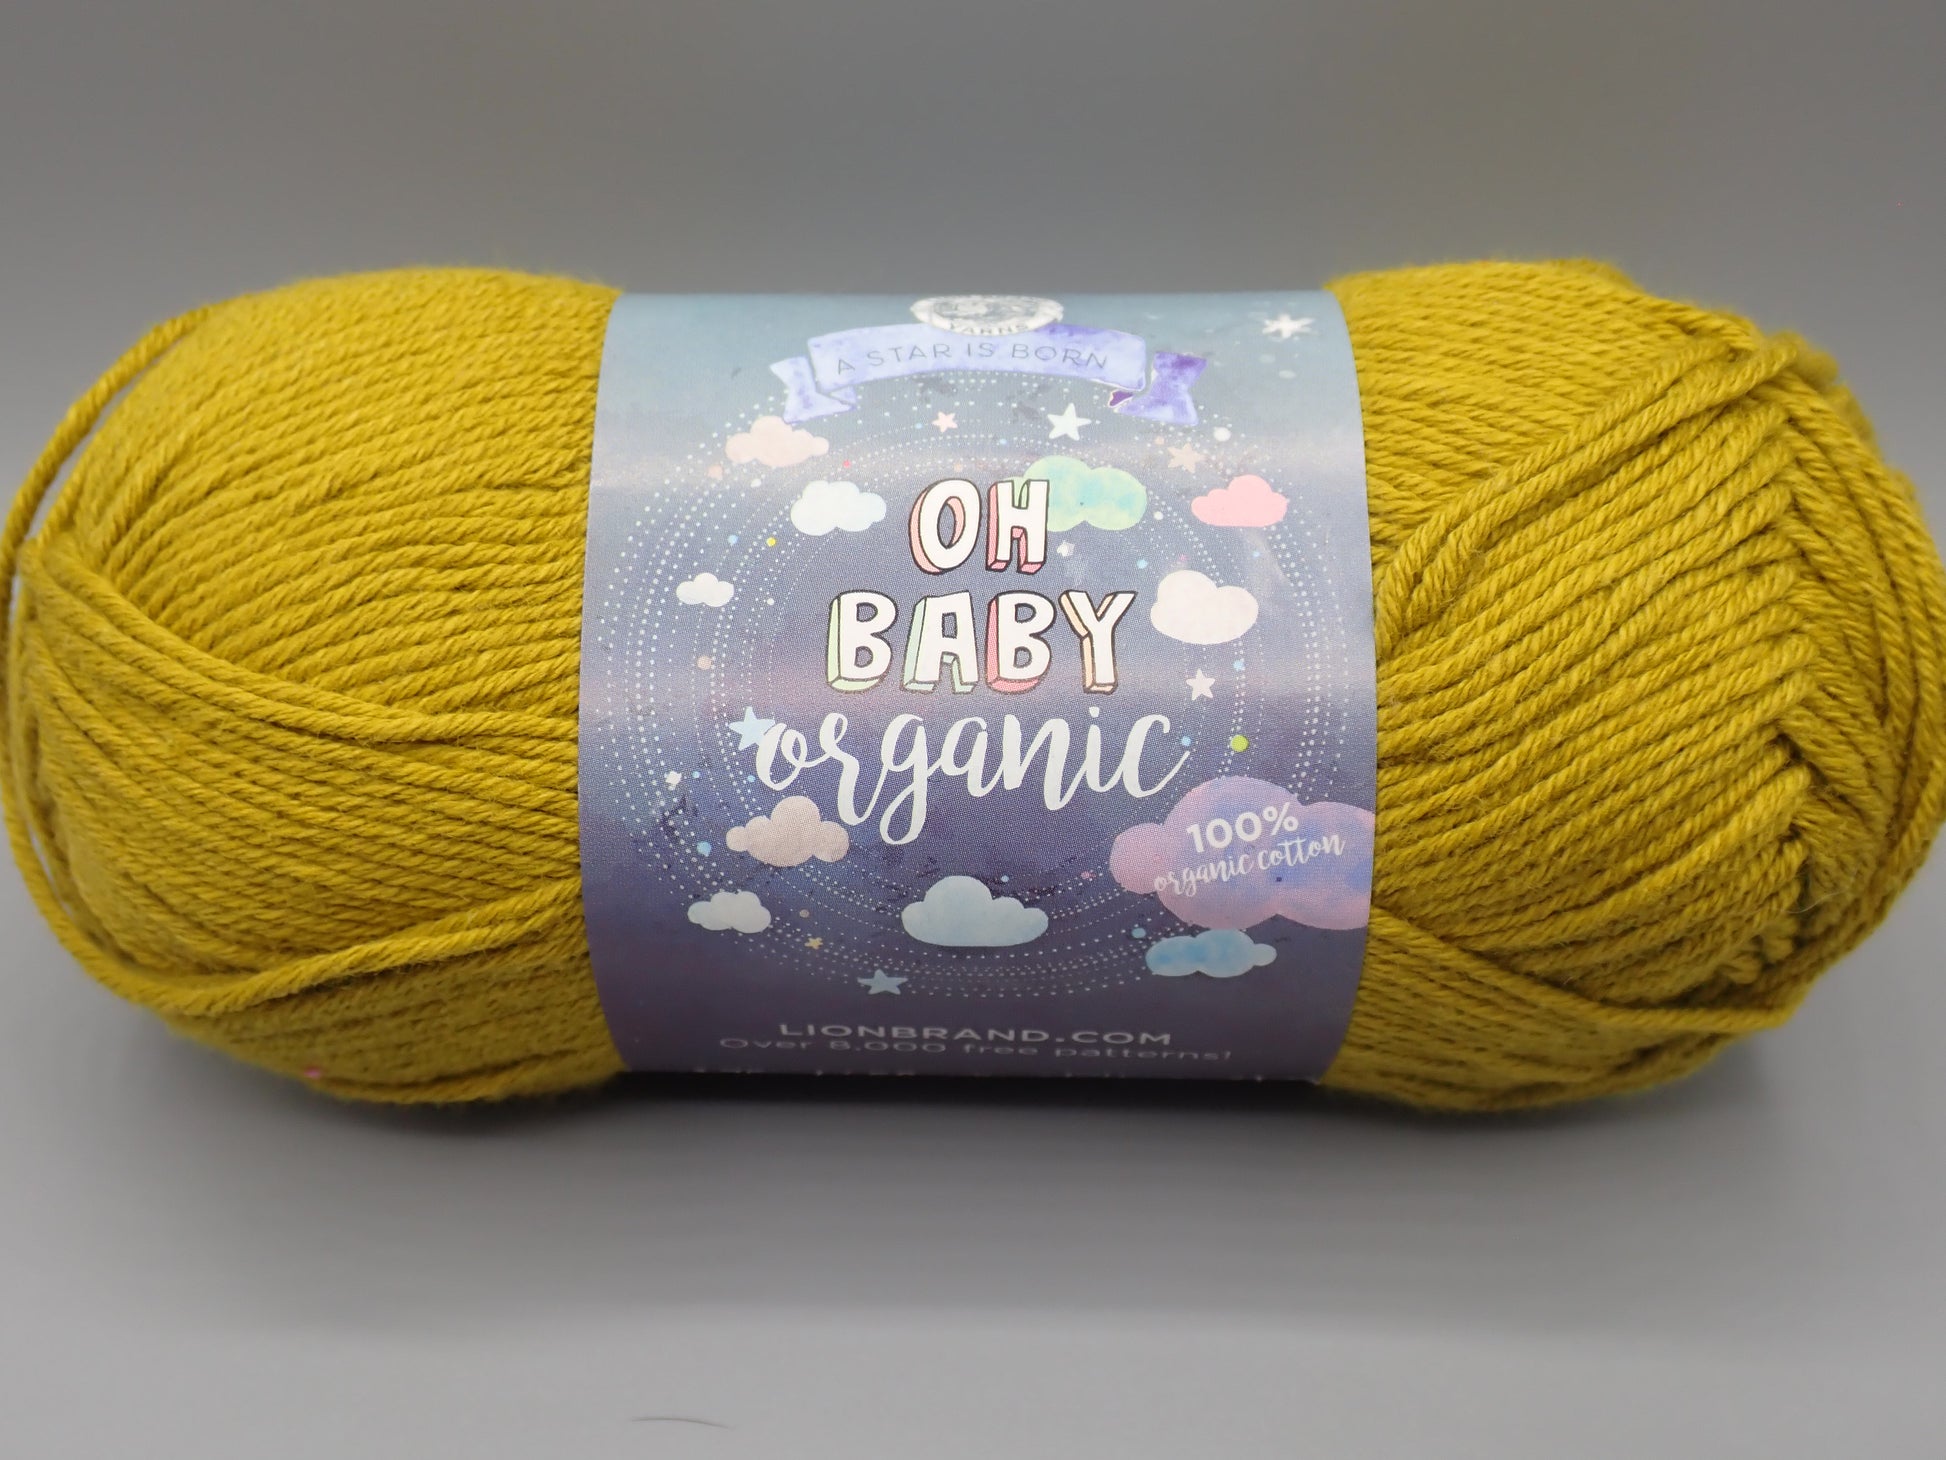 100% Organic Cotton Yarn from Lion Brand! - A Star is Born: Oh Baby 